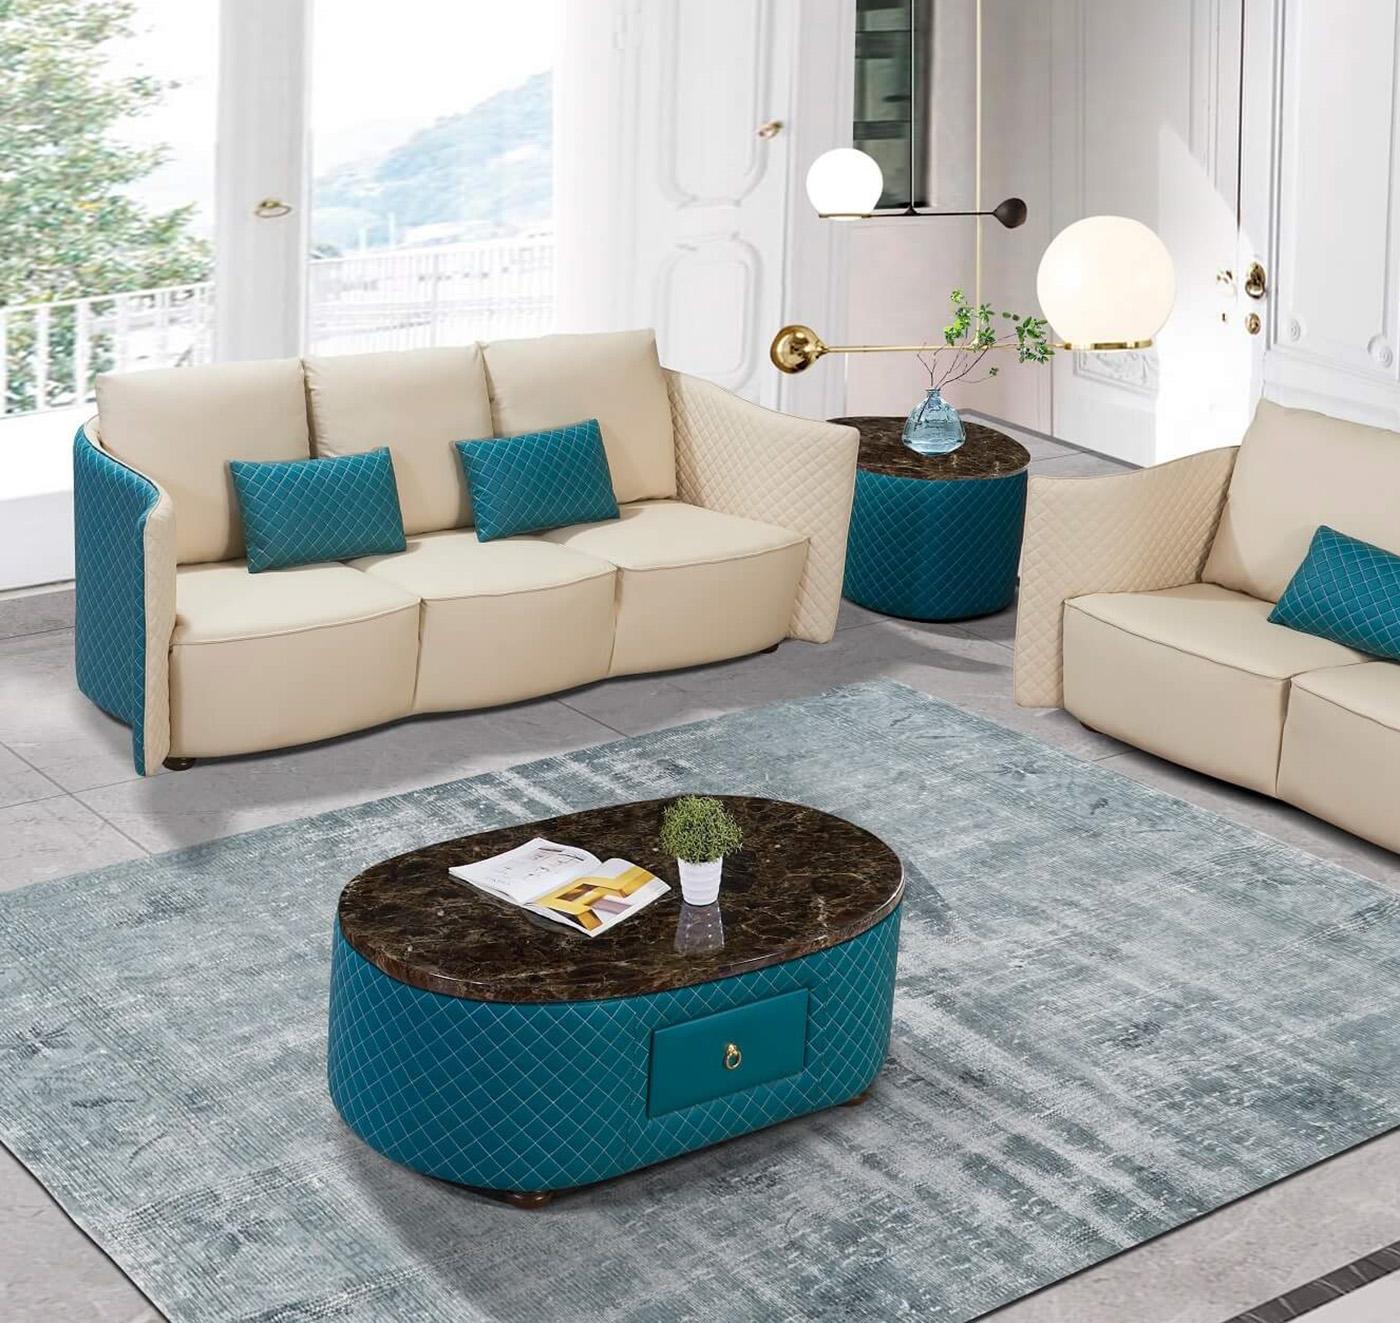 Contemporary, Modern Coffee Table Set MAKASSAR EF-52554-CT-Set-2 in Blue Italian Leather